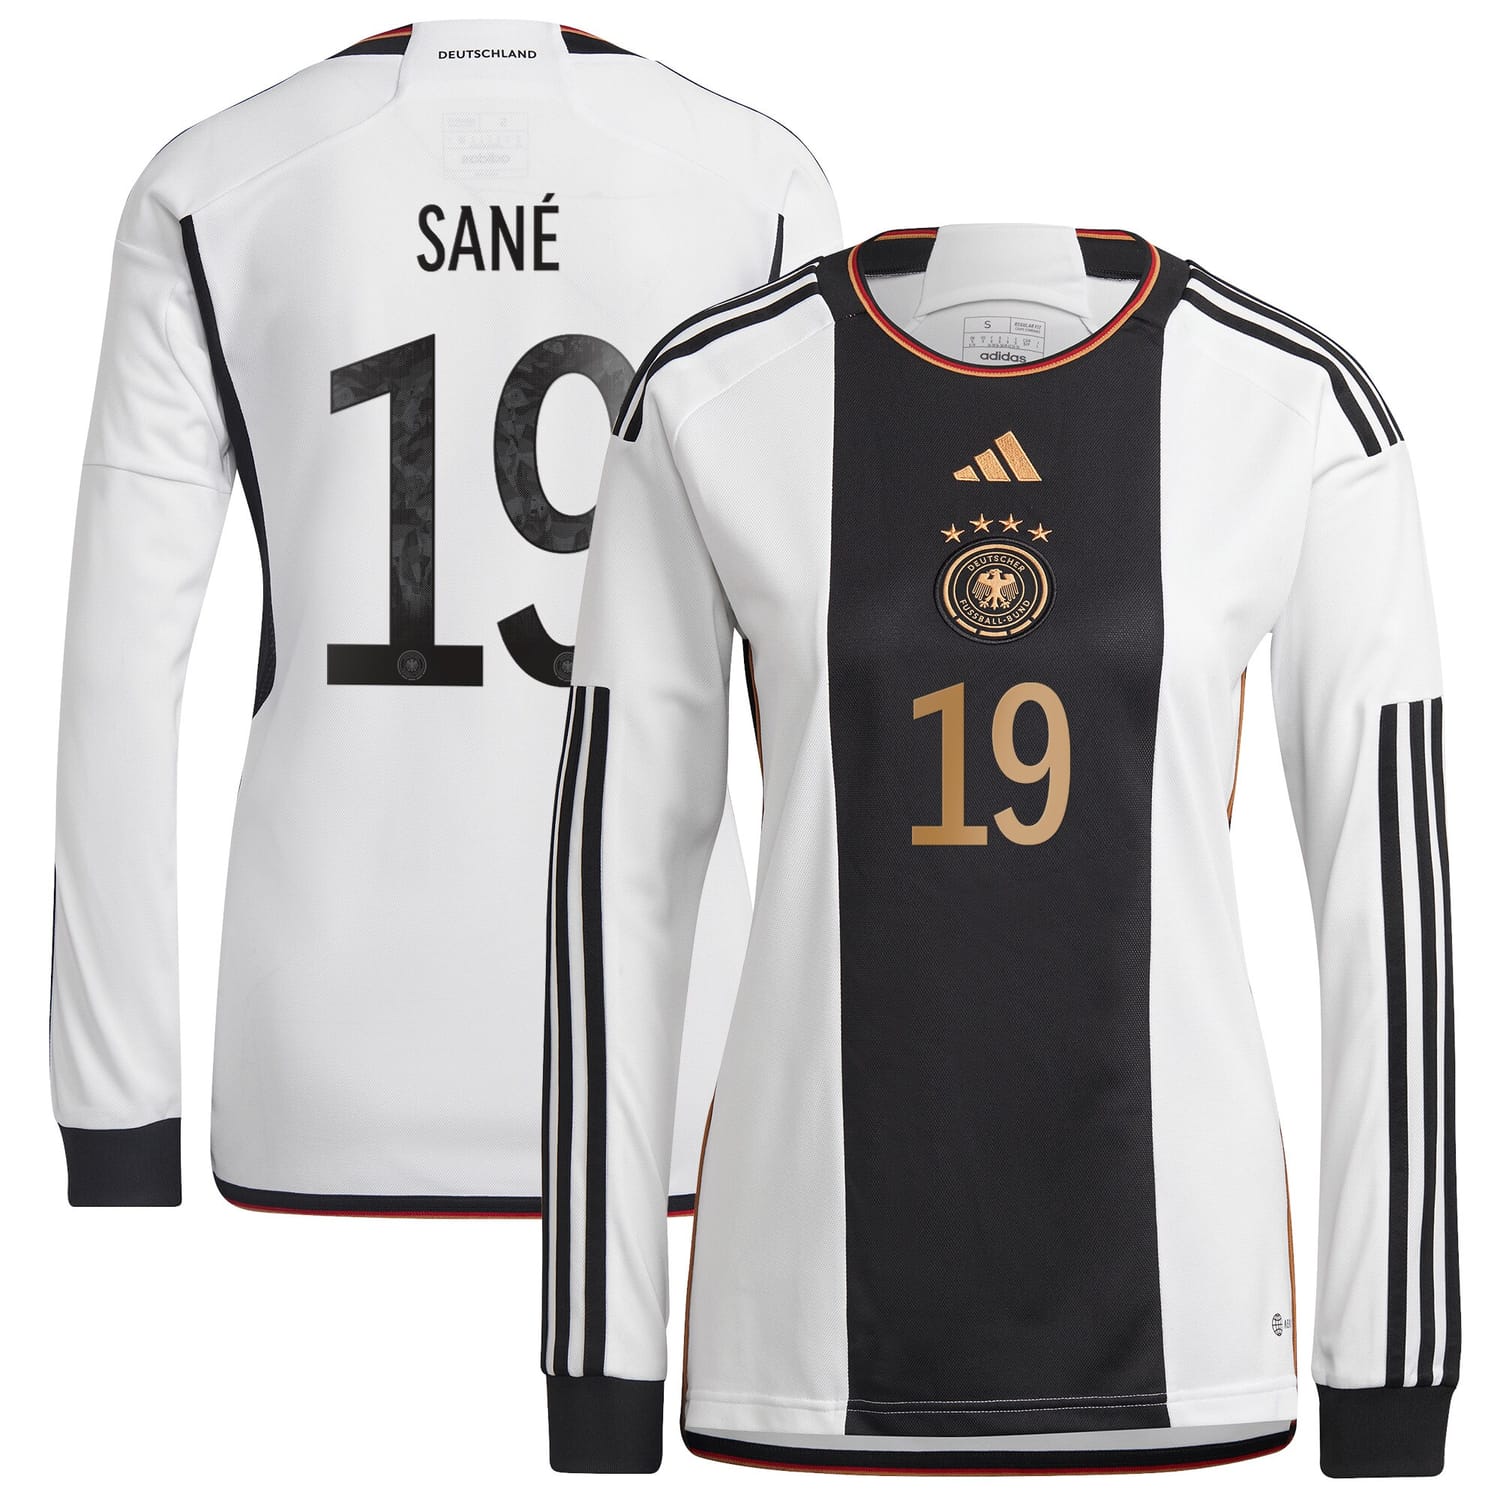 Germany National Team Home Jersey Shirt Long Sleeve player Leroy Sané 19 printing for Women